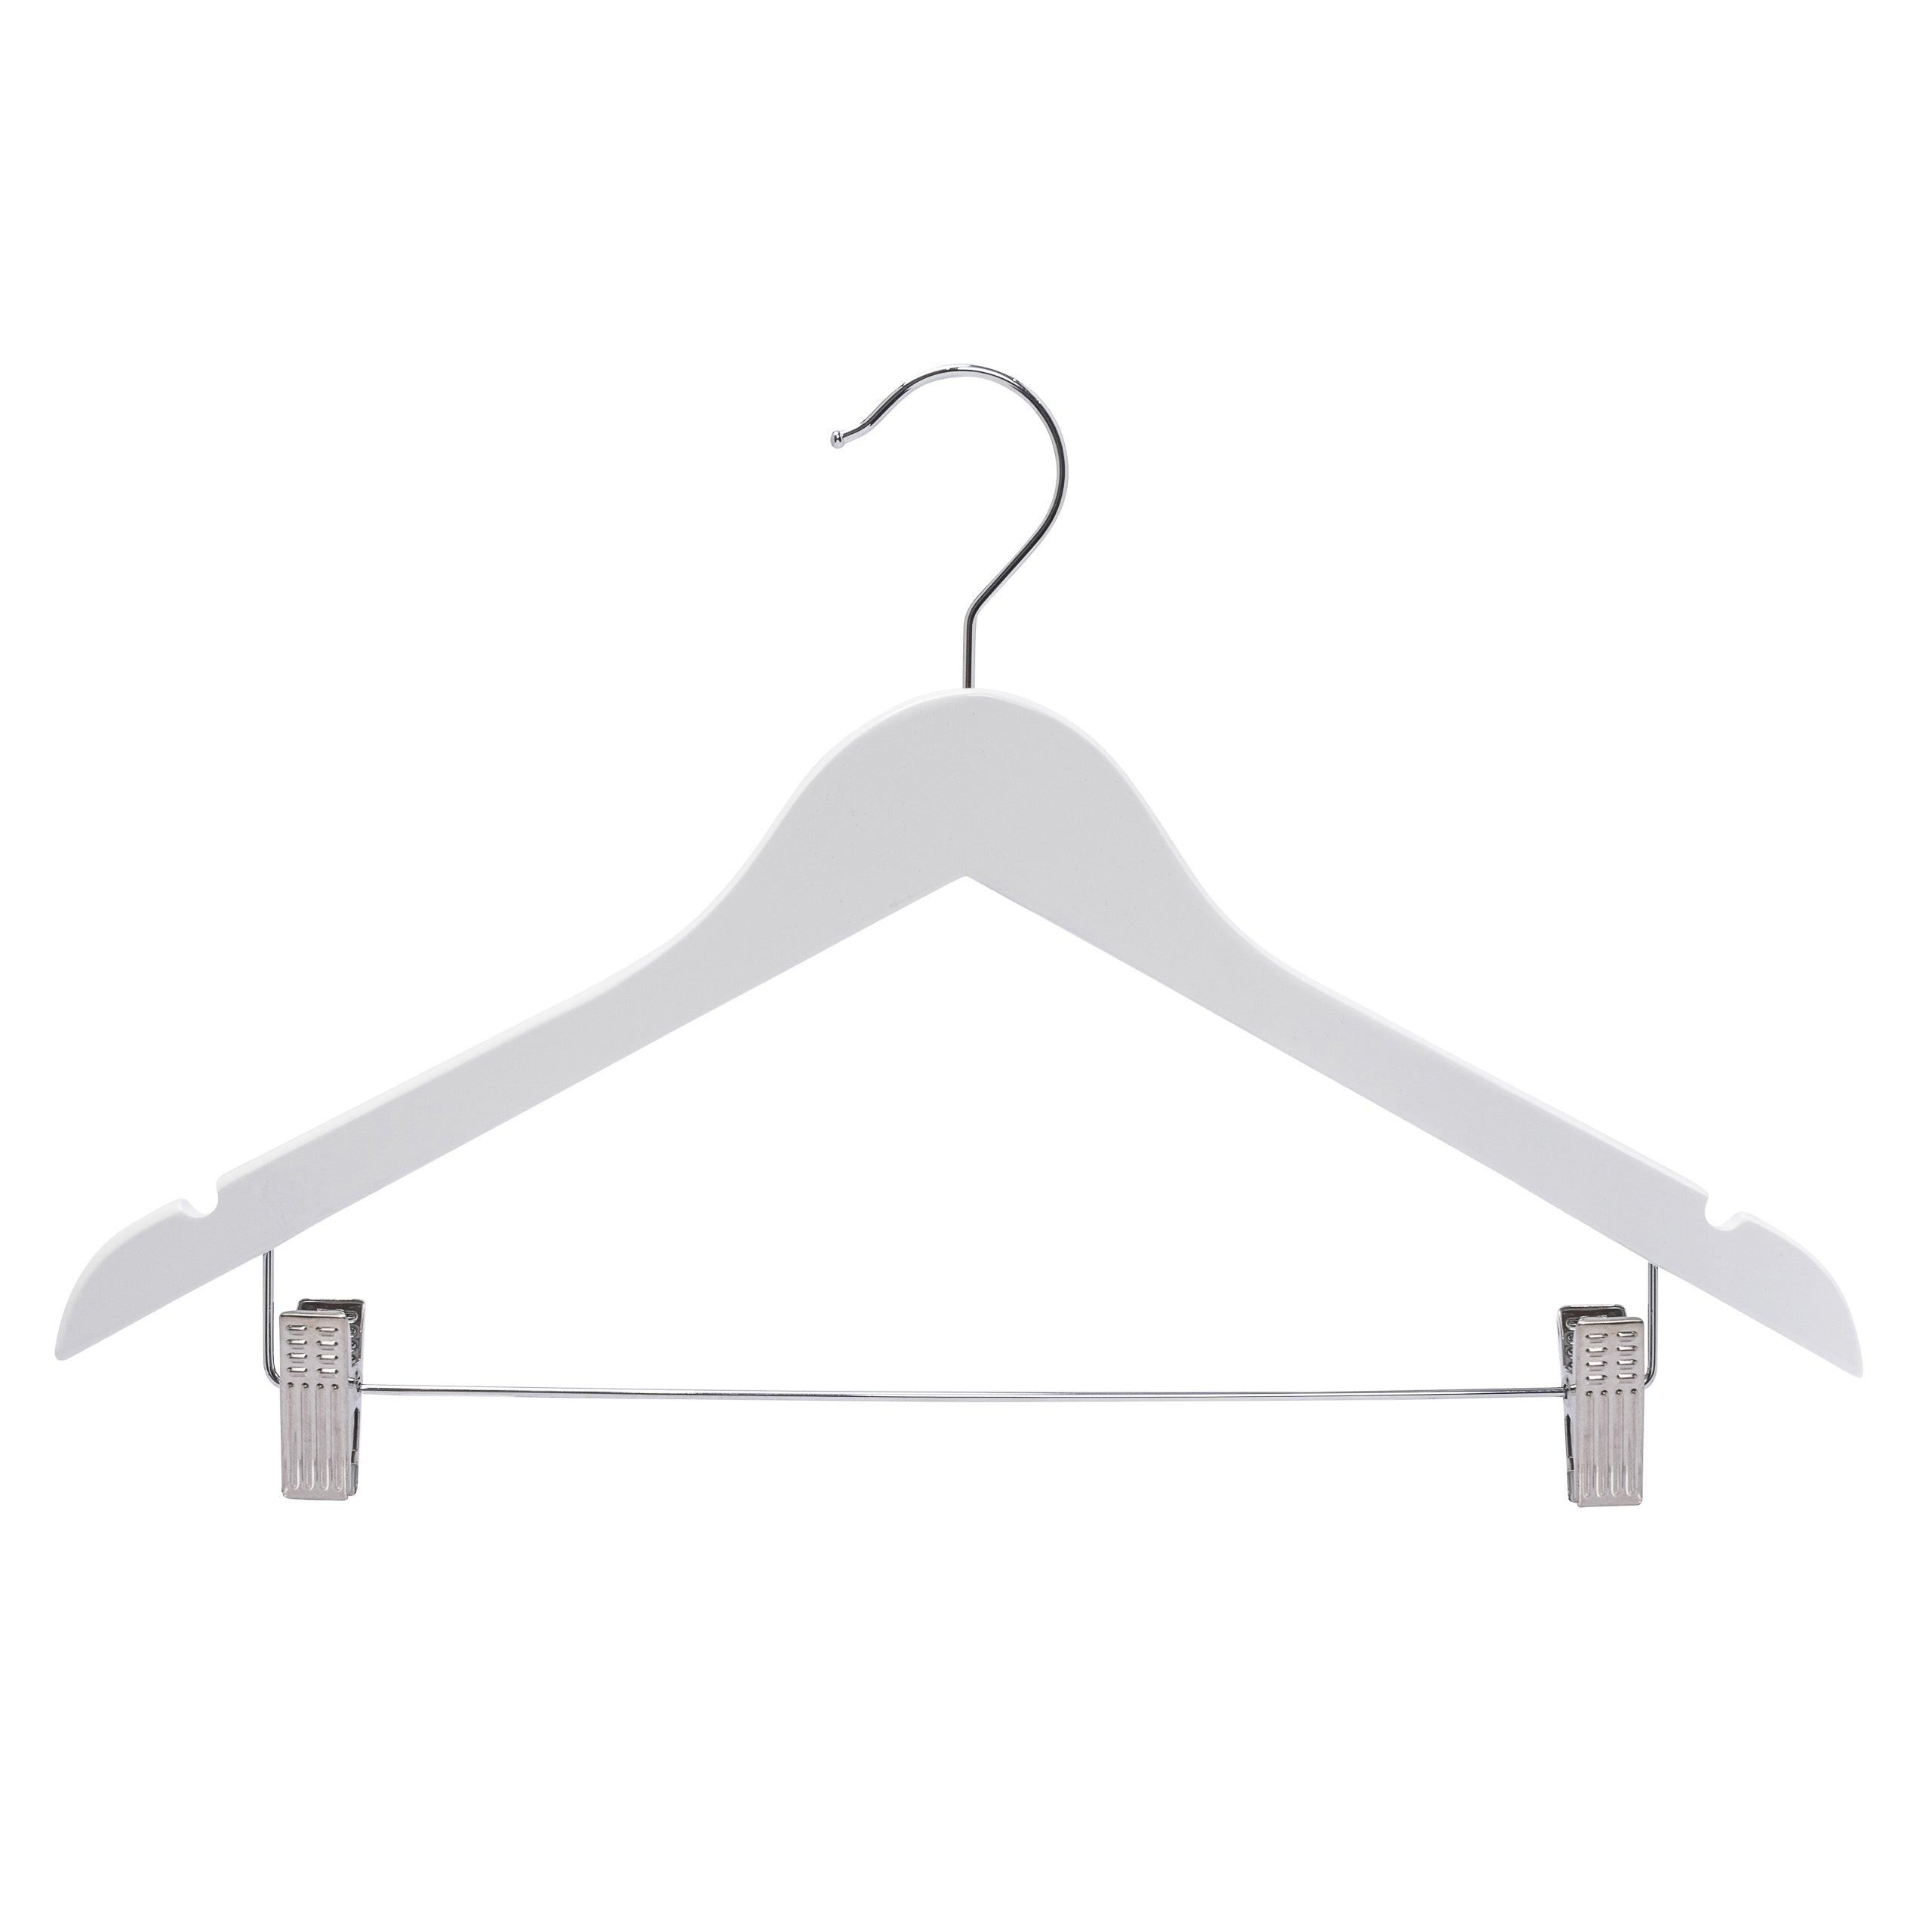 Amazon.com: Slack/Trousers Pants Hangers - 10 Pack - Strong and Durable  Anti-Rust Chrome Metal Hangers (White) : Home & Kitchen